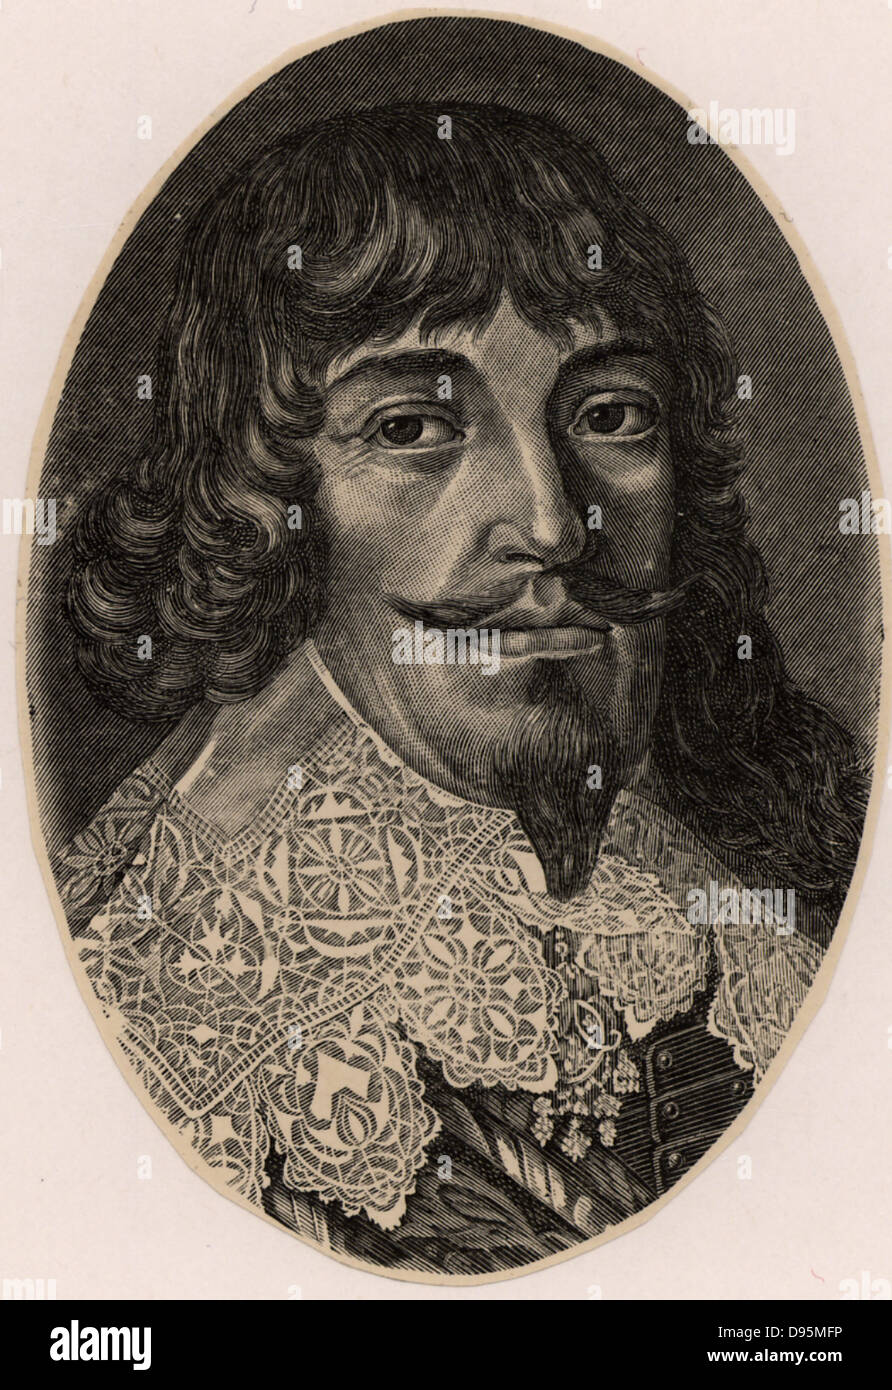 Bernhard, Duke of Weimar (1604-1639). In the Thirty Years War (1618-1648) fought for Protestant cause under the banner of Gustavus Adolphus. Engraving. Stock Photo